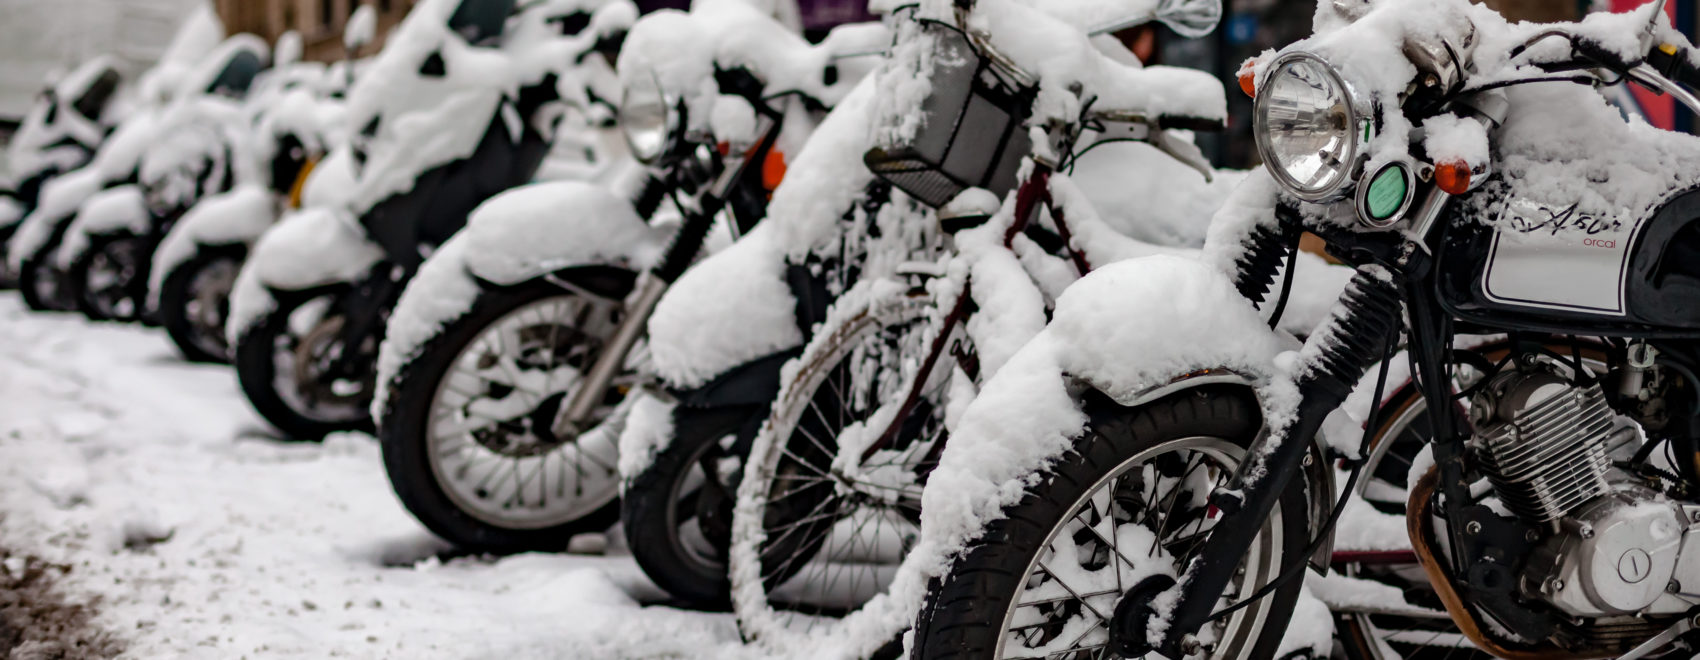 Winterizing your Motorcycle for the Snow